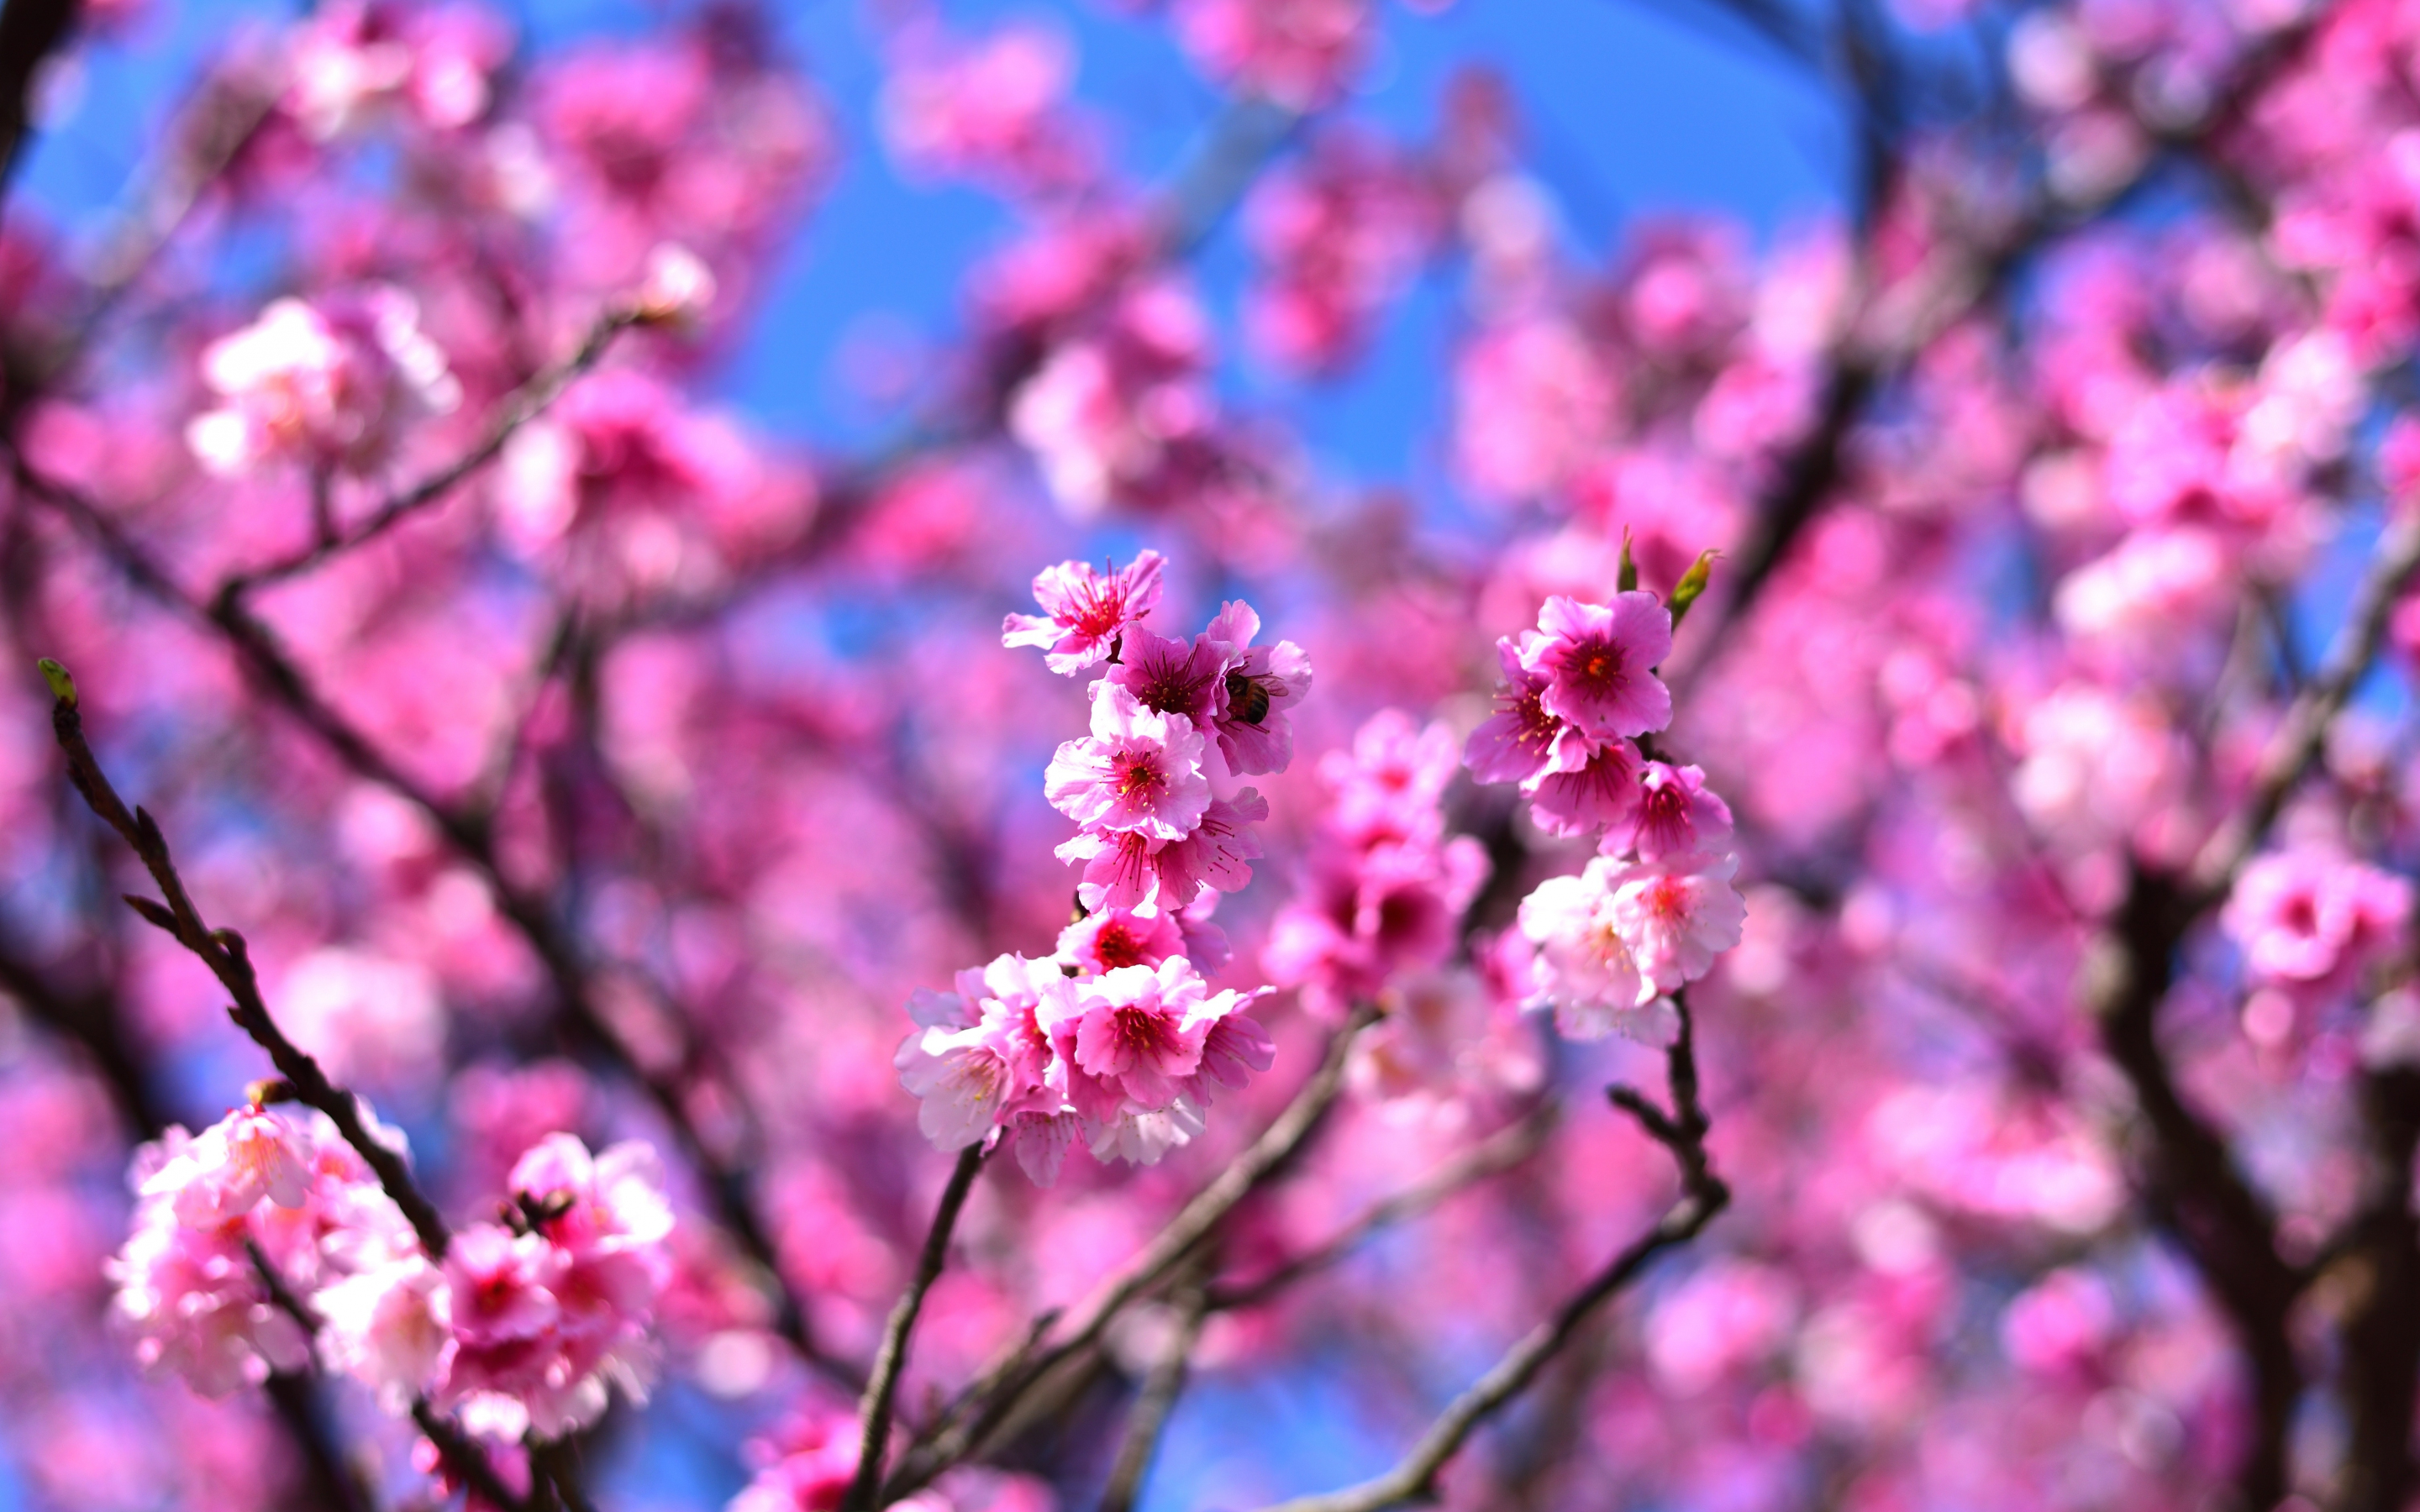 Cherry blossom, pink flowers, tree branches, 2880x1800 wallpaper